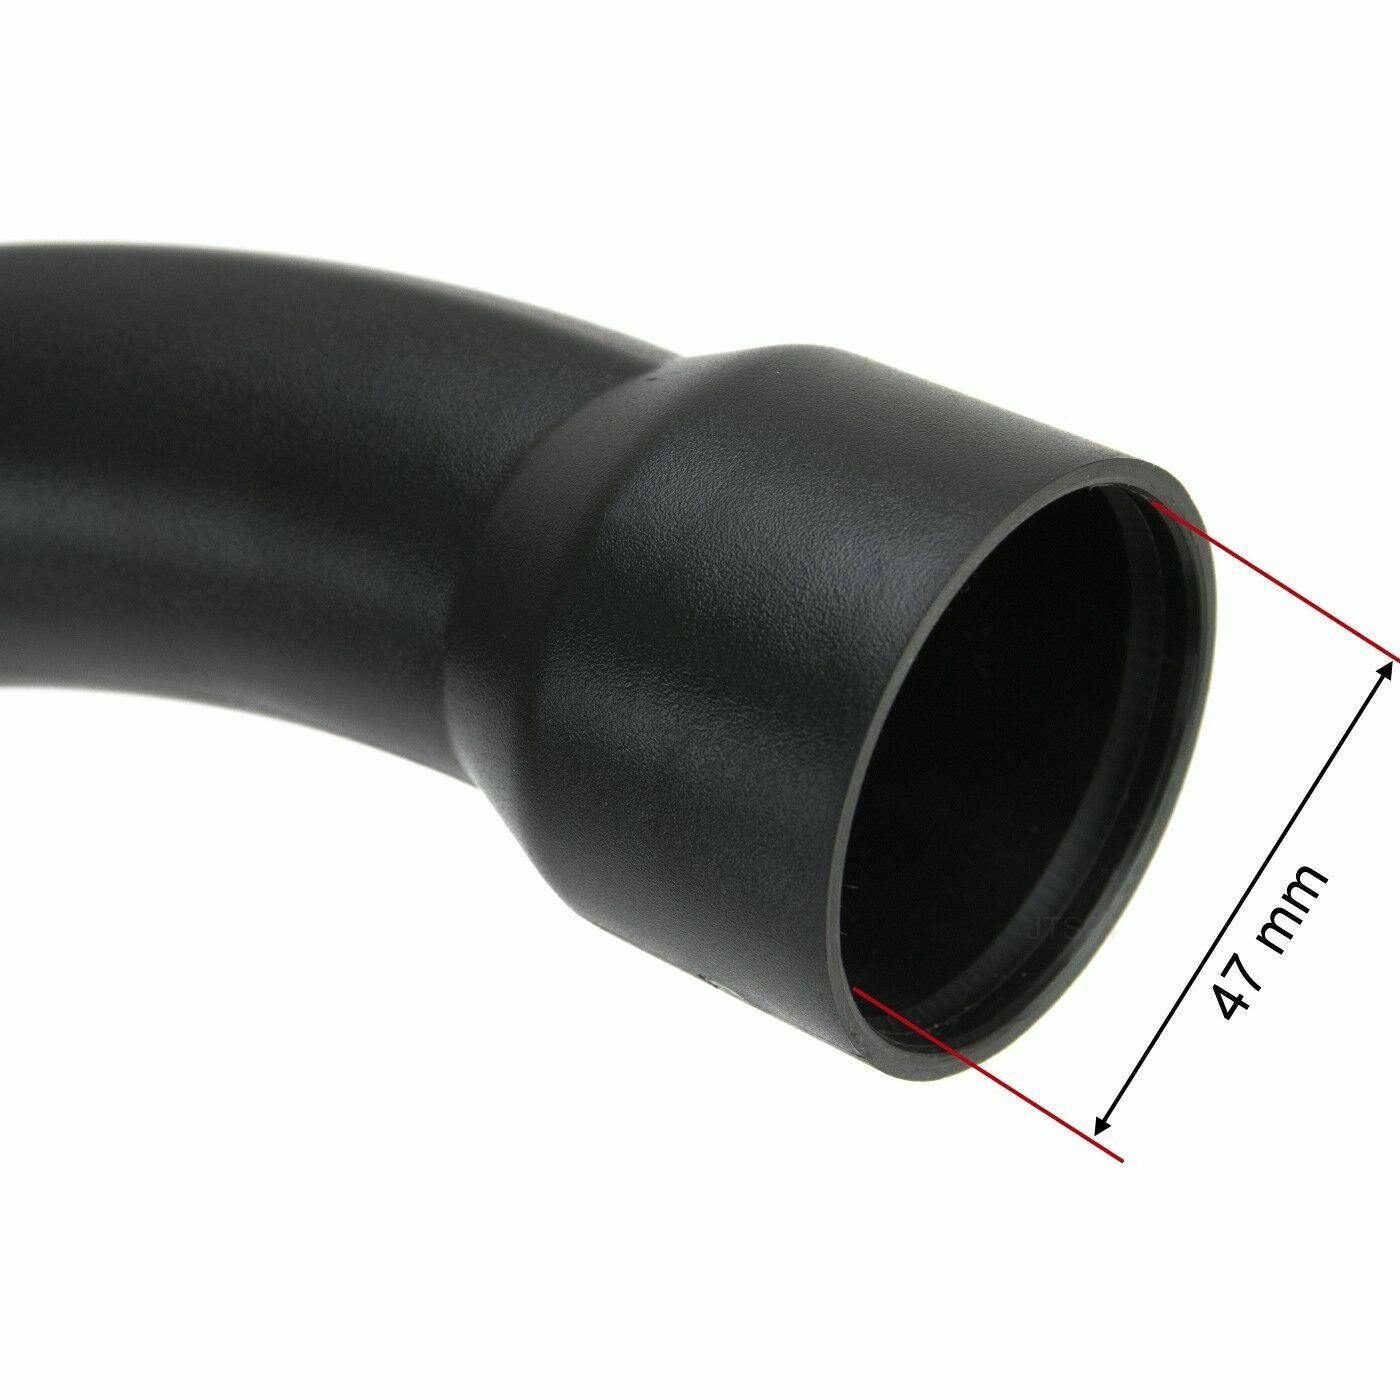 Vacuum Cleaner Hose Bent Curved Handle For Miele S5710 S5711 S5760 S5761 S5780 Sparesbarn